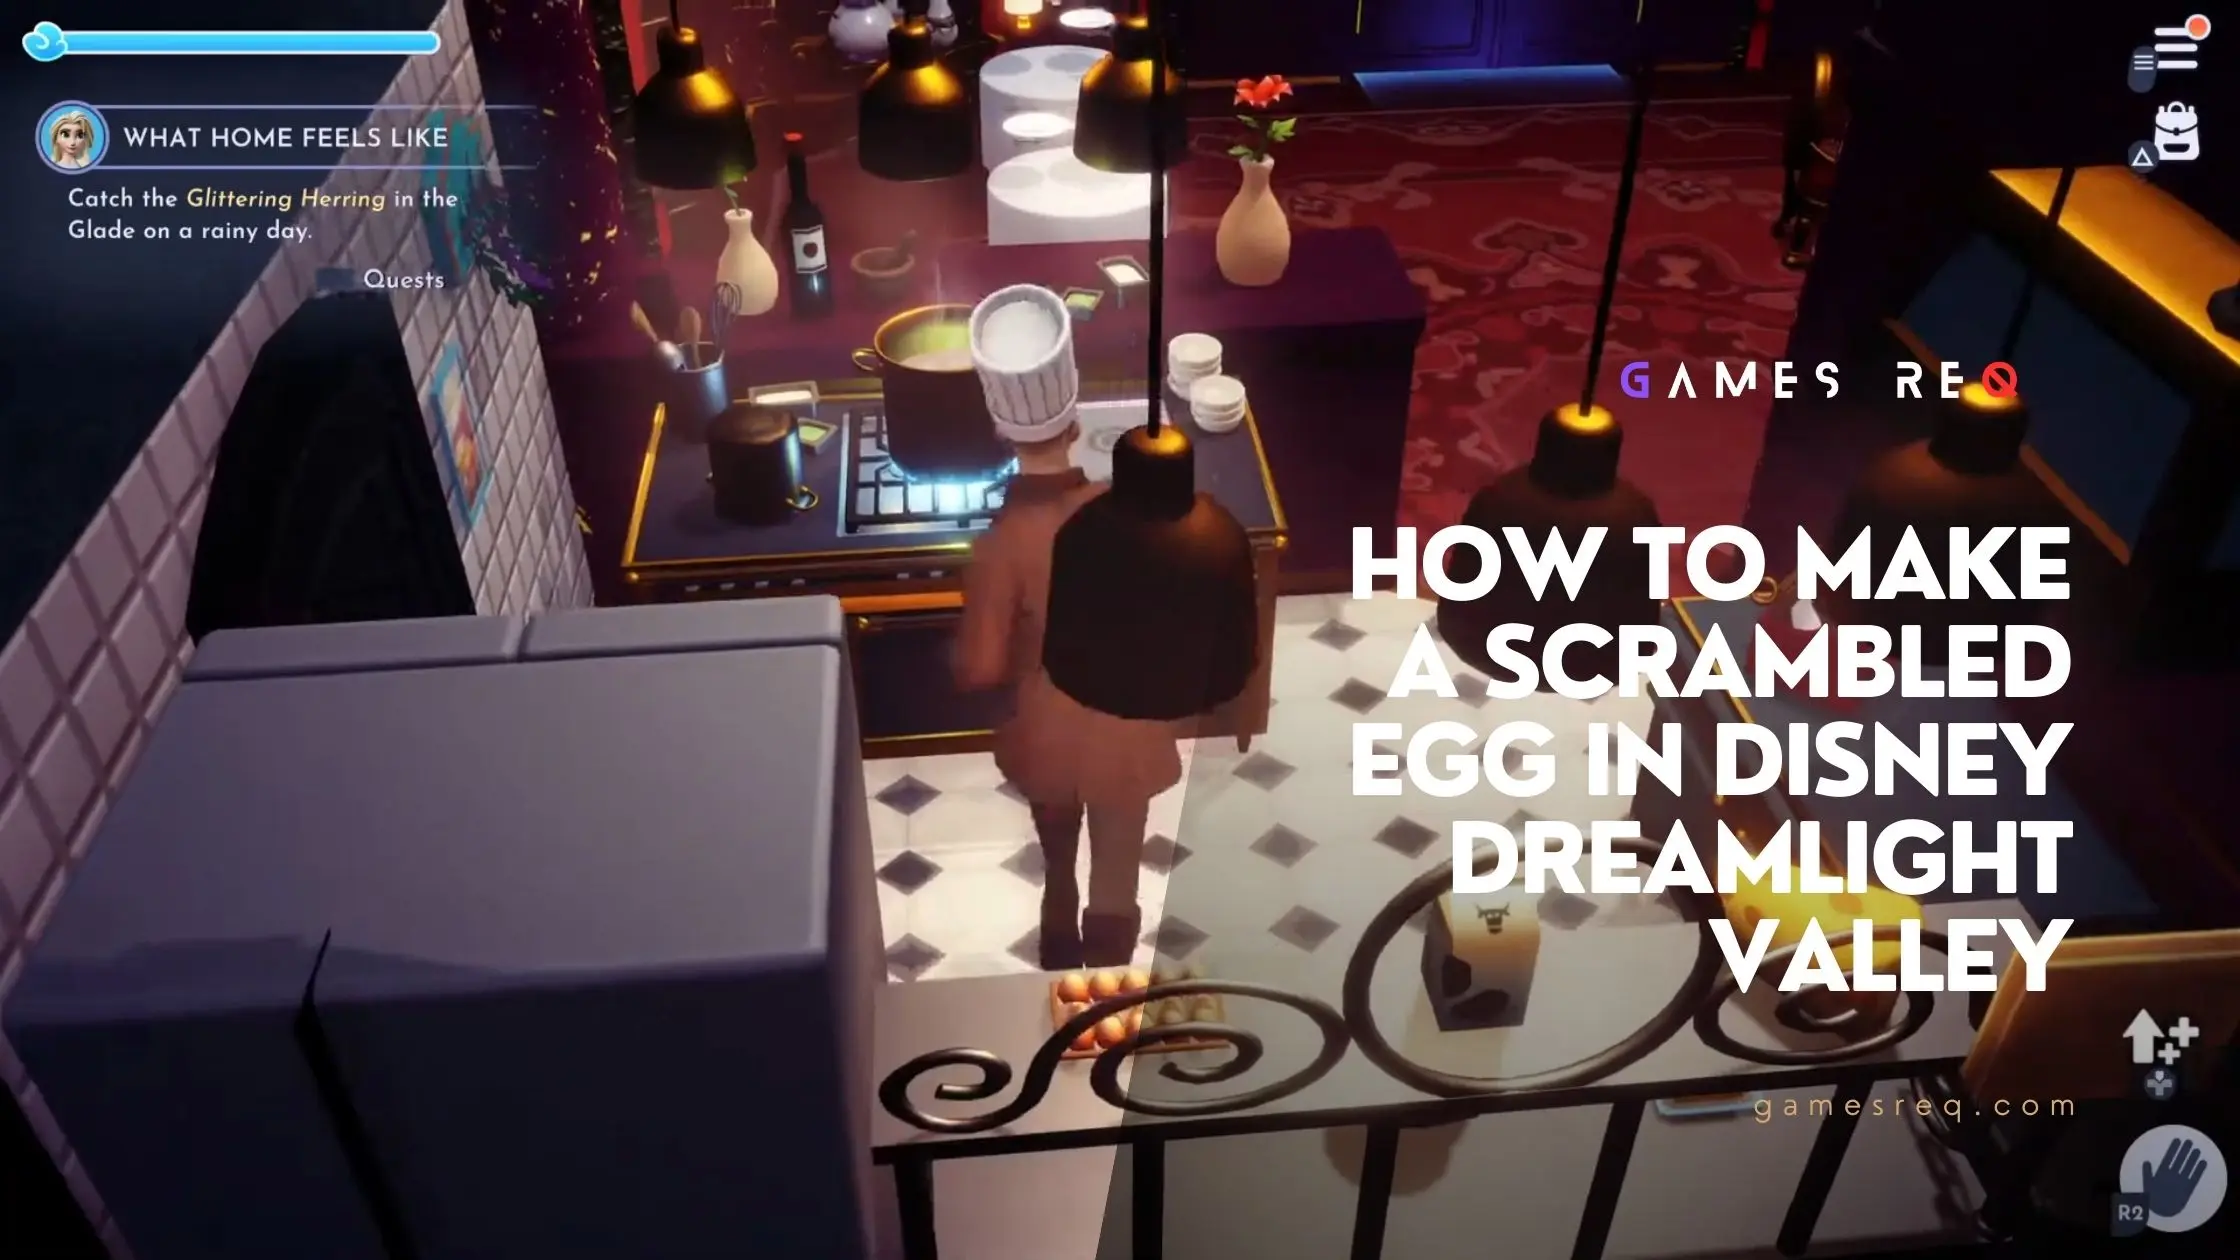 How To Make A Scrambled Egg In Disney Dreamlight Valley? Games Req